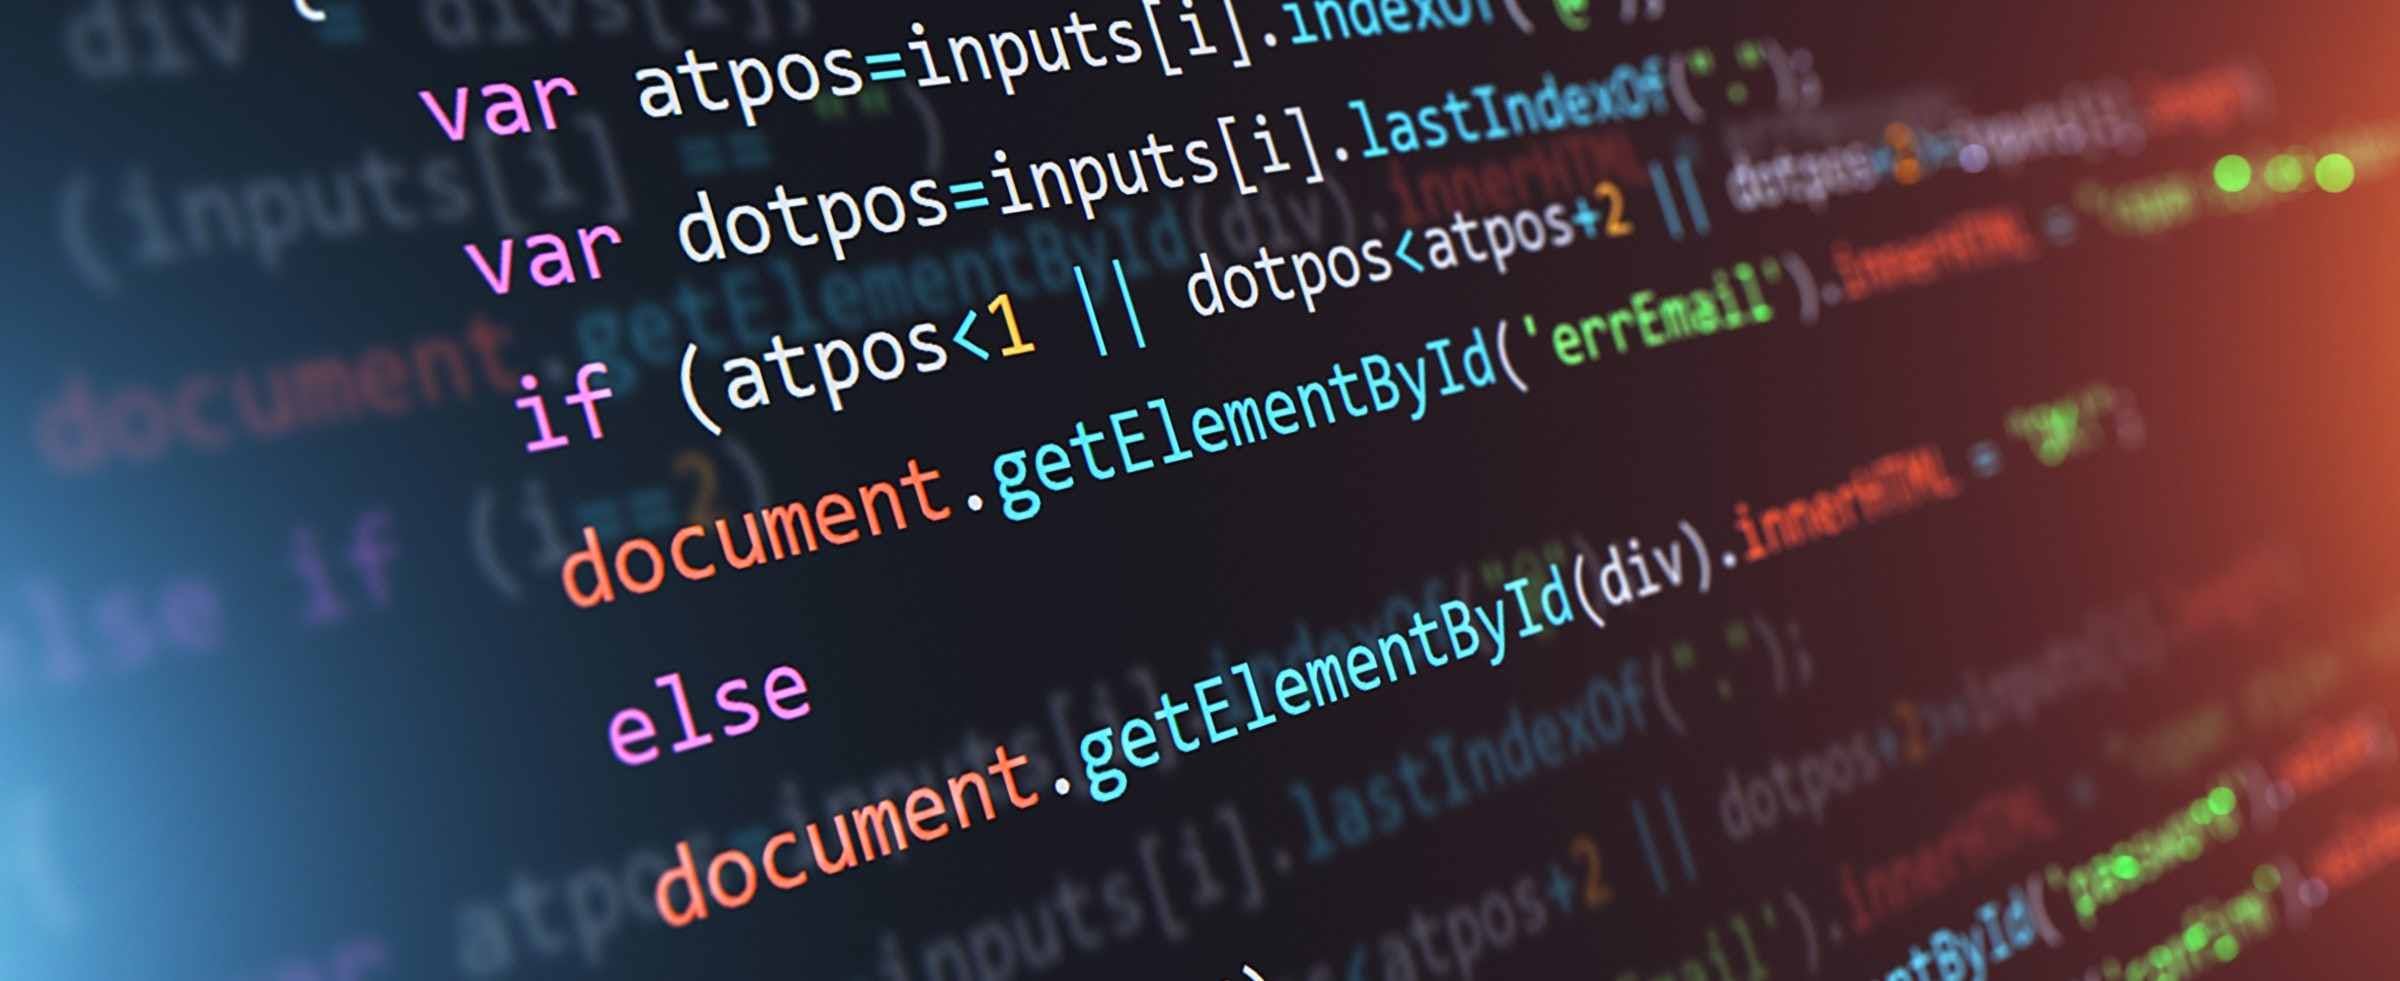 Intellectual property of source code: how to protect it